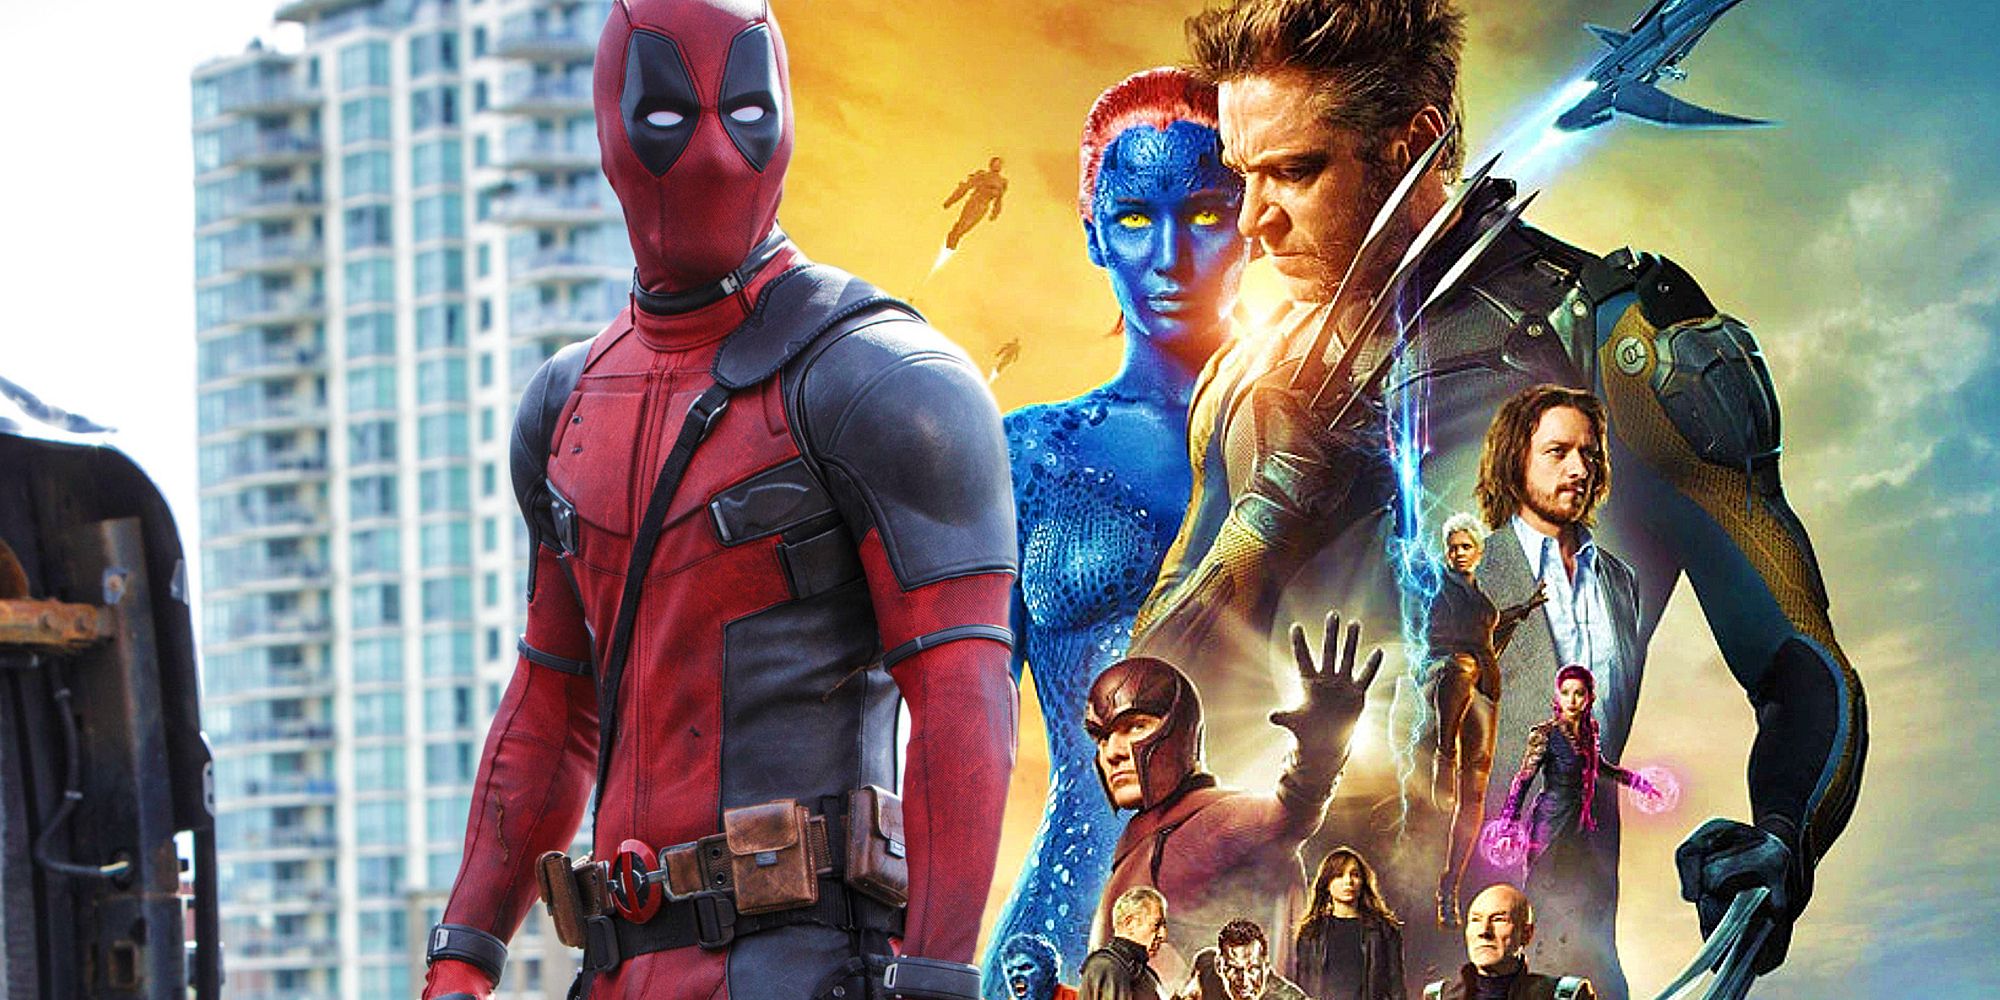 Deadpool next to the poster for X-Men: Days of Future Past